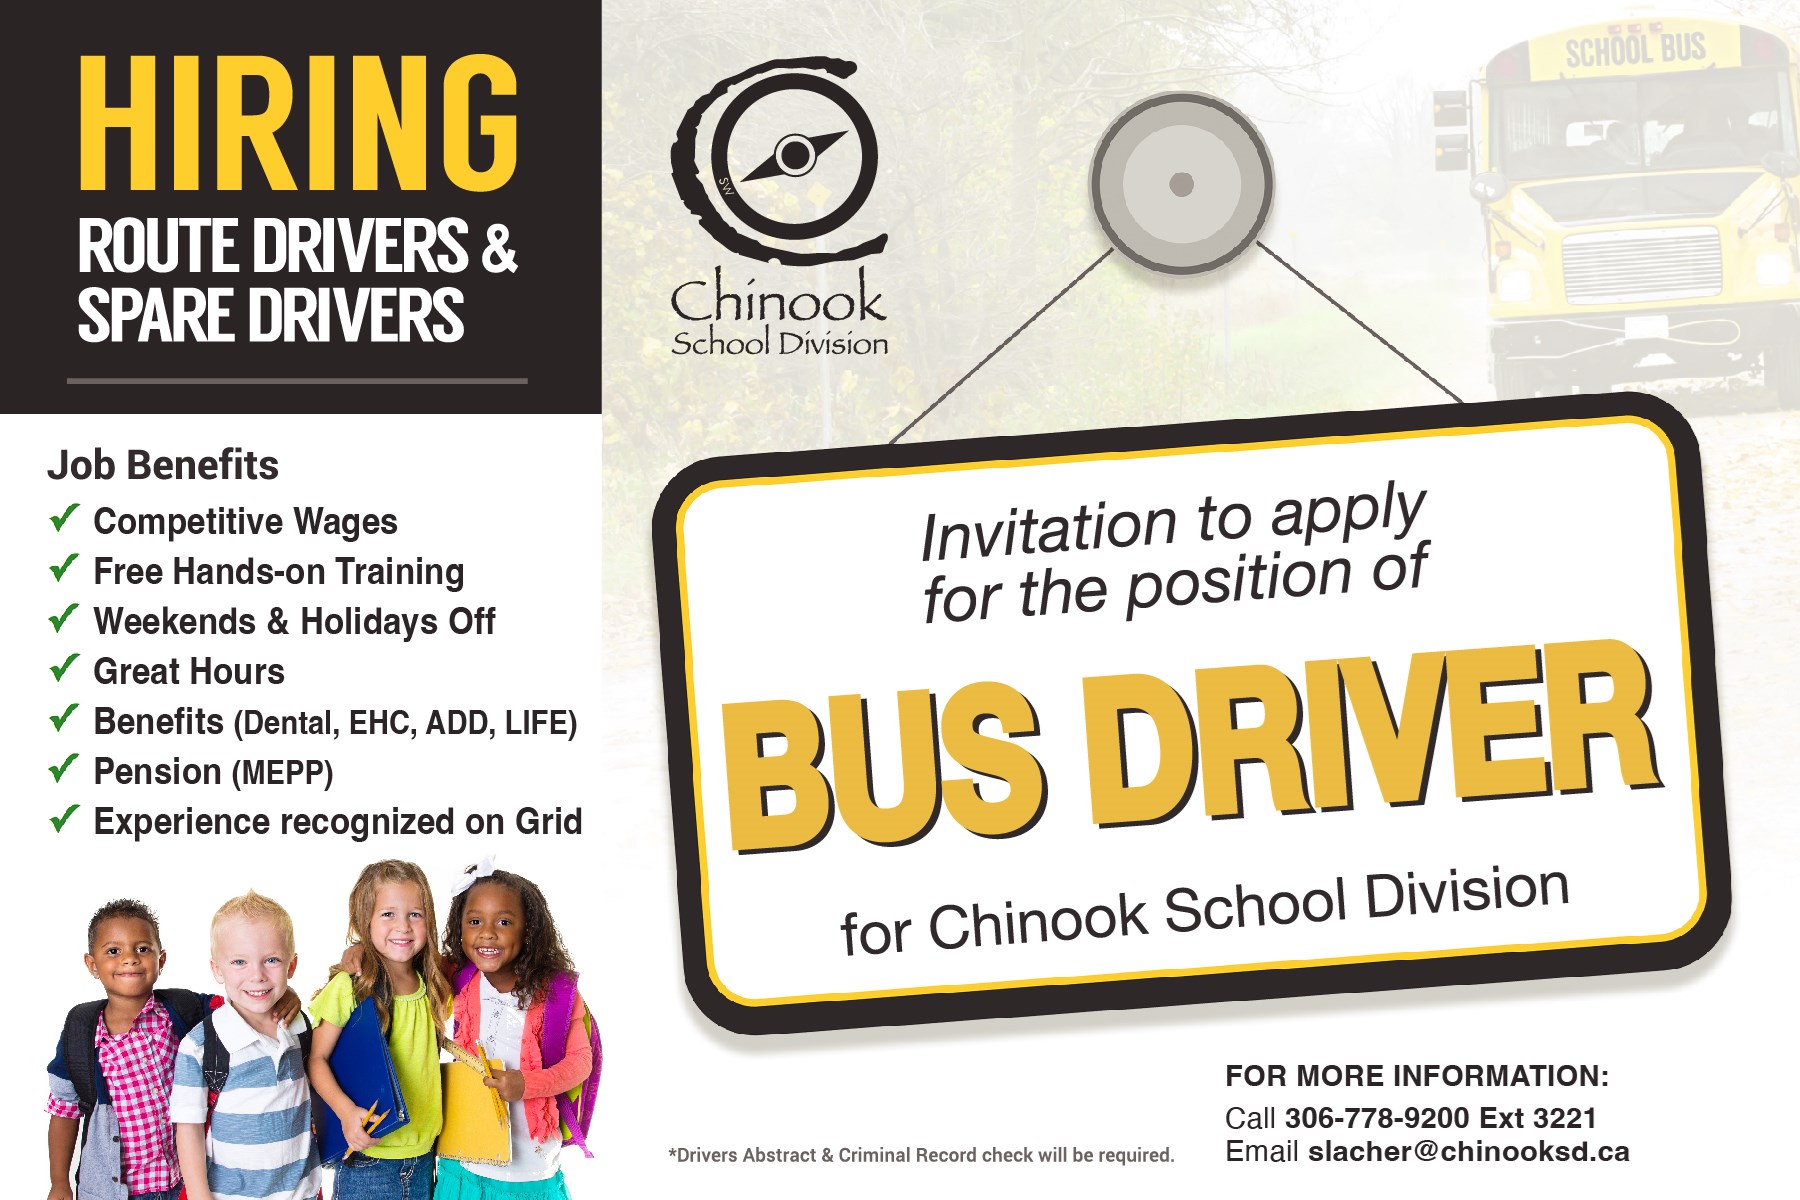 Hiring Route Drivers and Spare Drivers